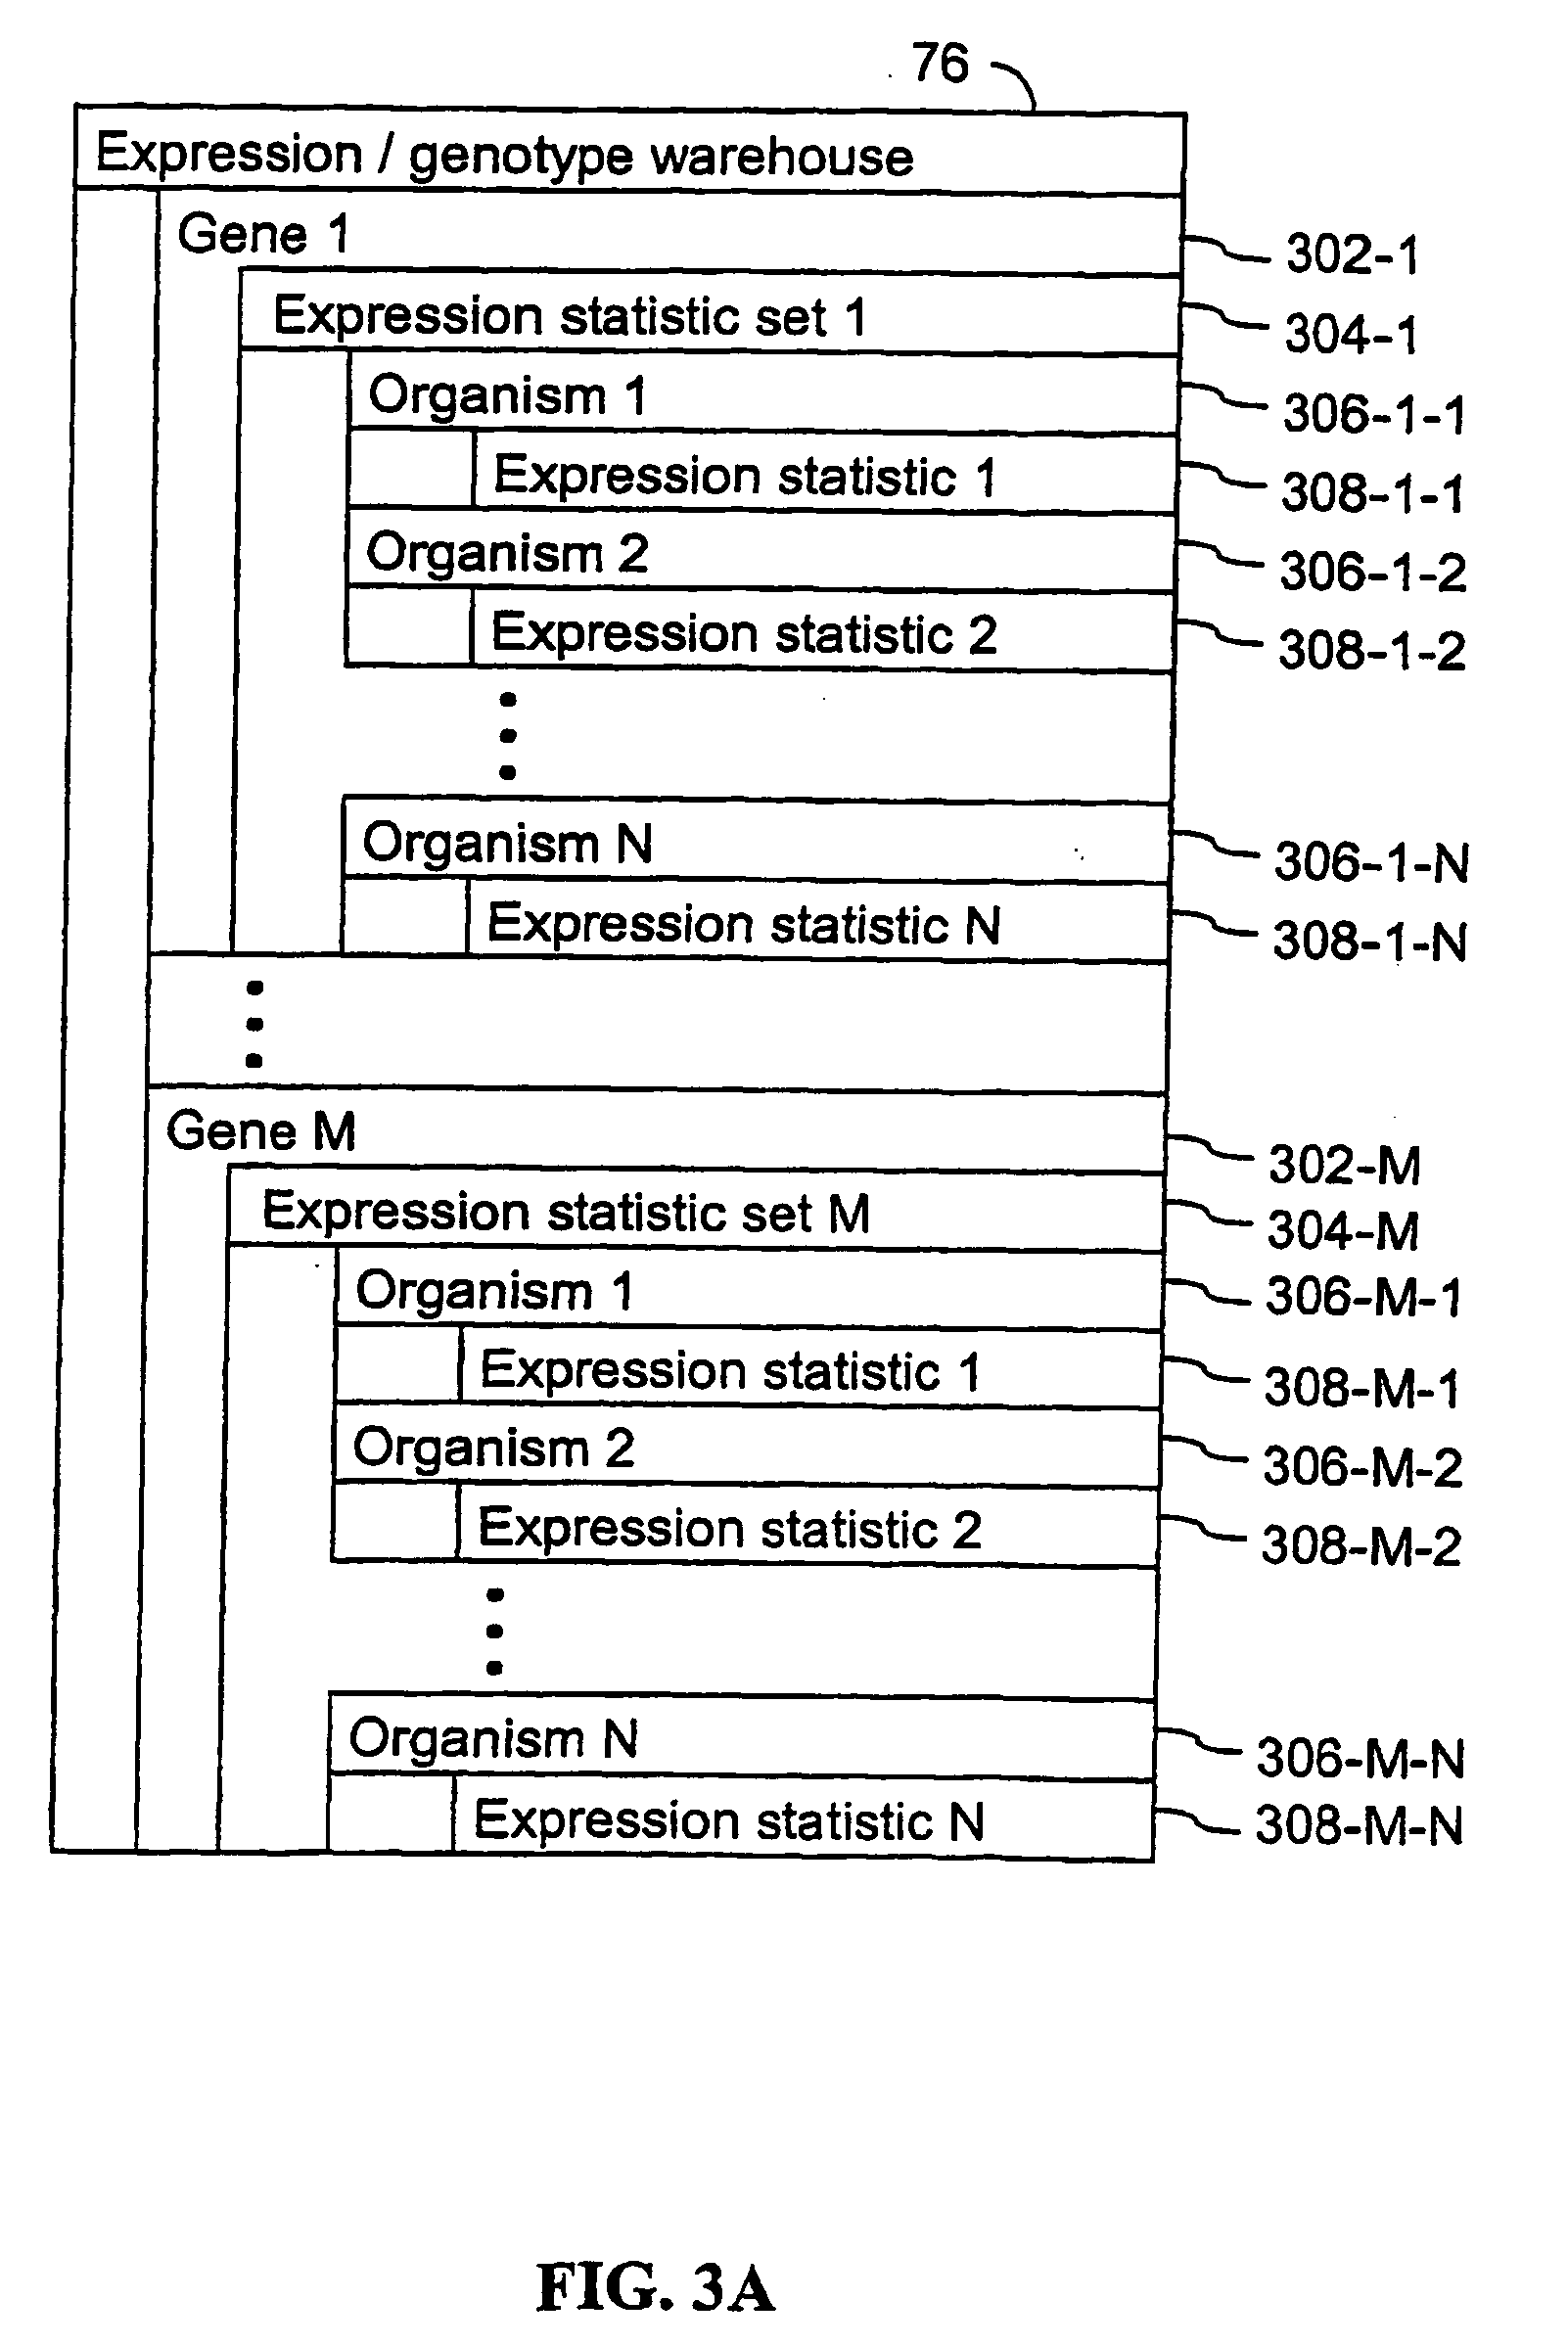 Computer systems and methods that use clinical and expression quantitative trait loci to associate genes with traits